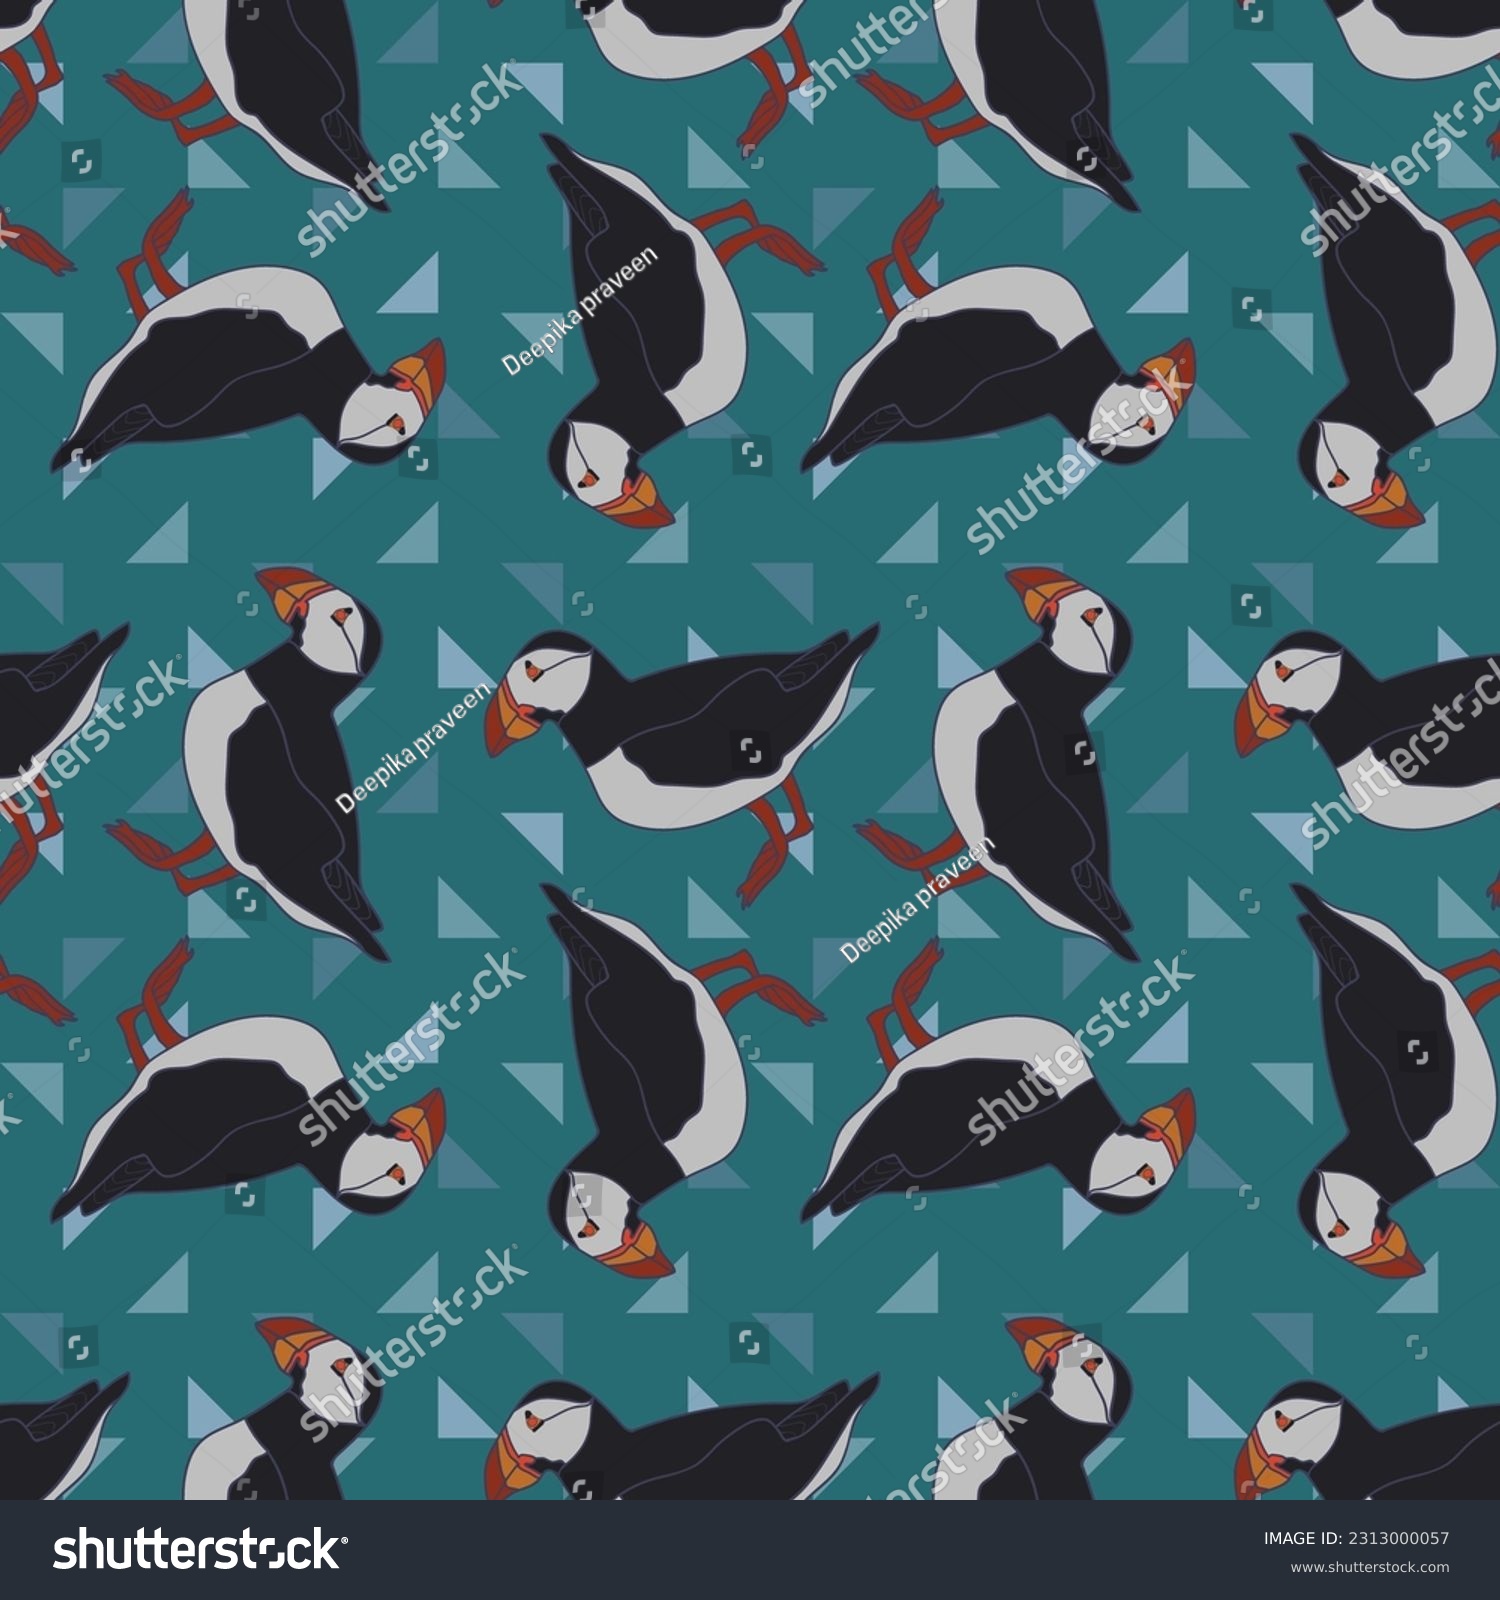 SVG of Seamless pattern with Atlantic puffin. Fratercula arctica or common puffin birds design vector illustration. great for textiles, banners, wallpapers. svg